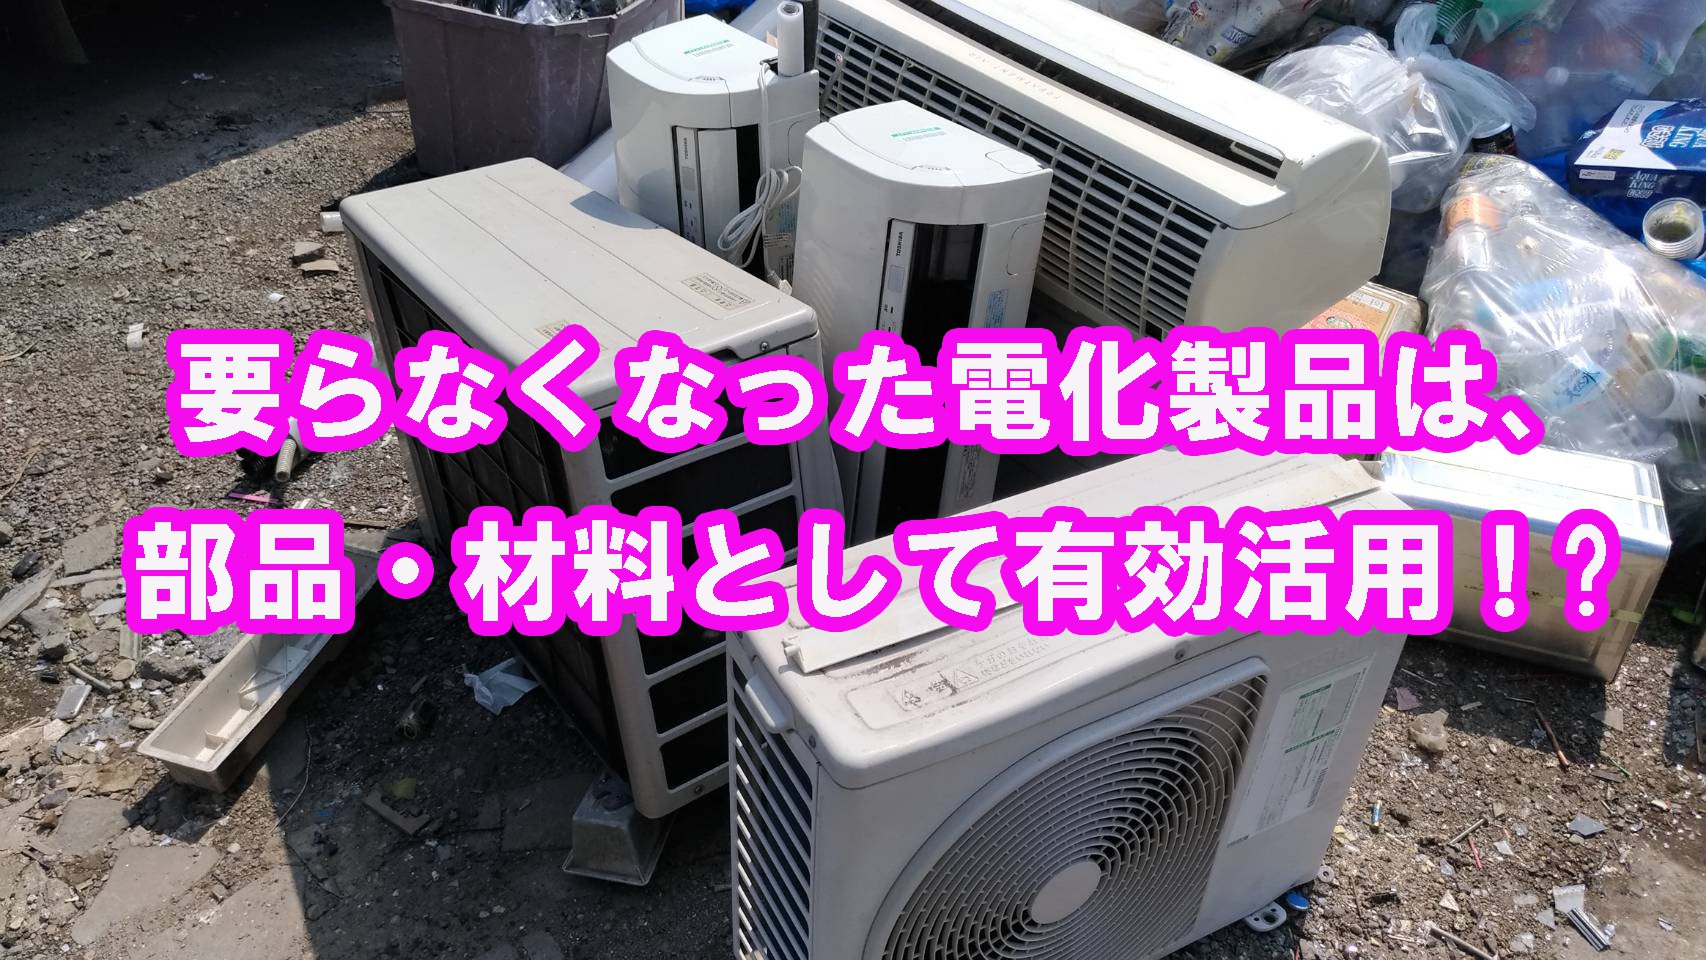 You are currently viewing 社長も緊急出動！？紙敷の東葛清掃(株)でリサイクル電化製品の適正処分